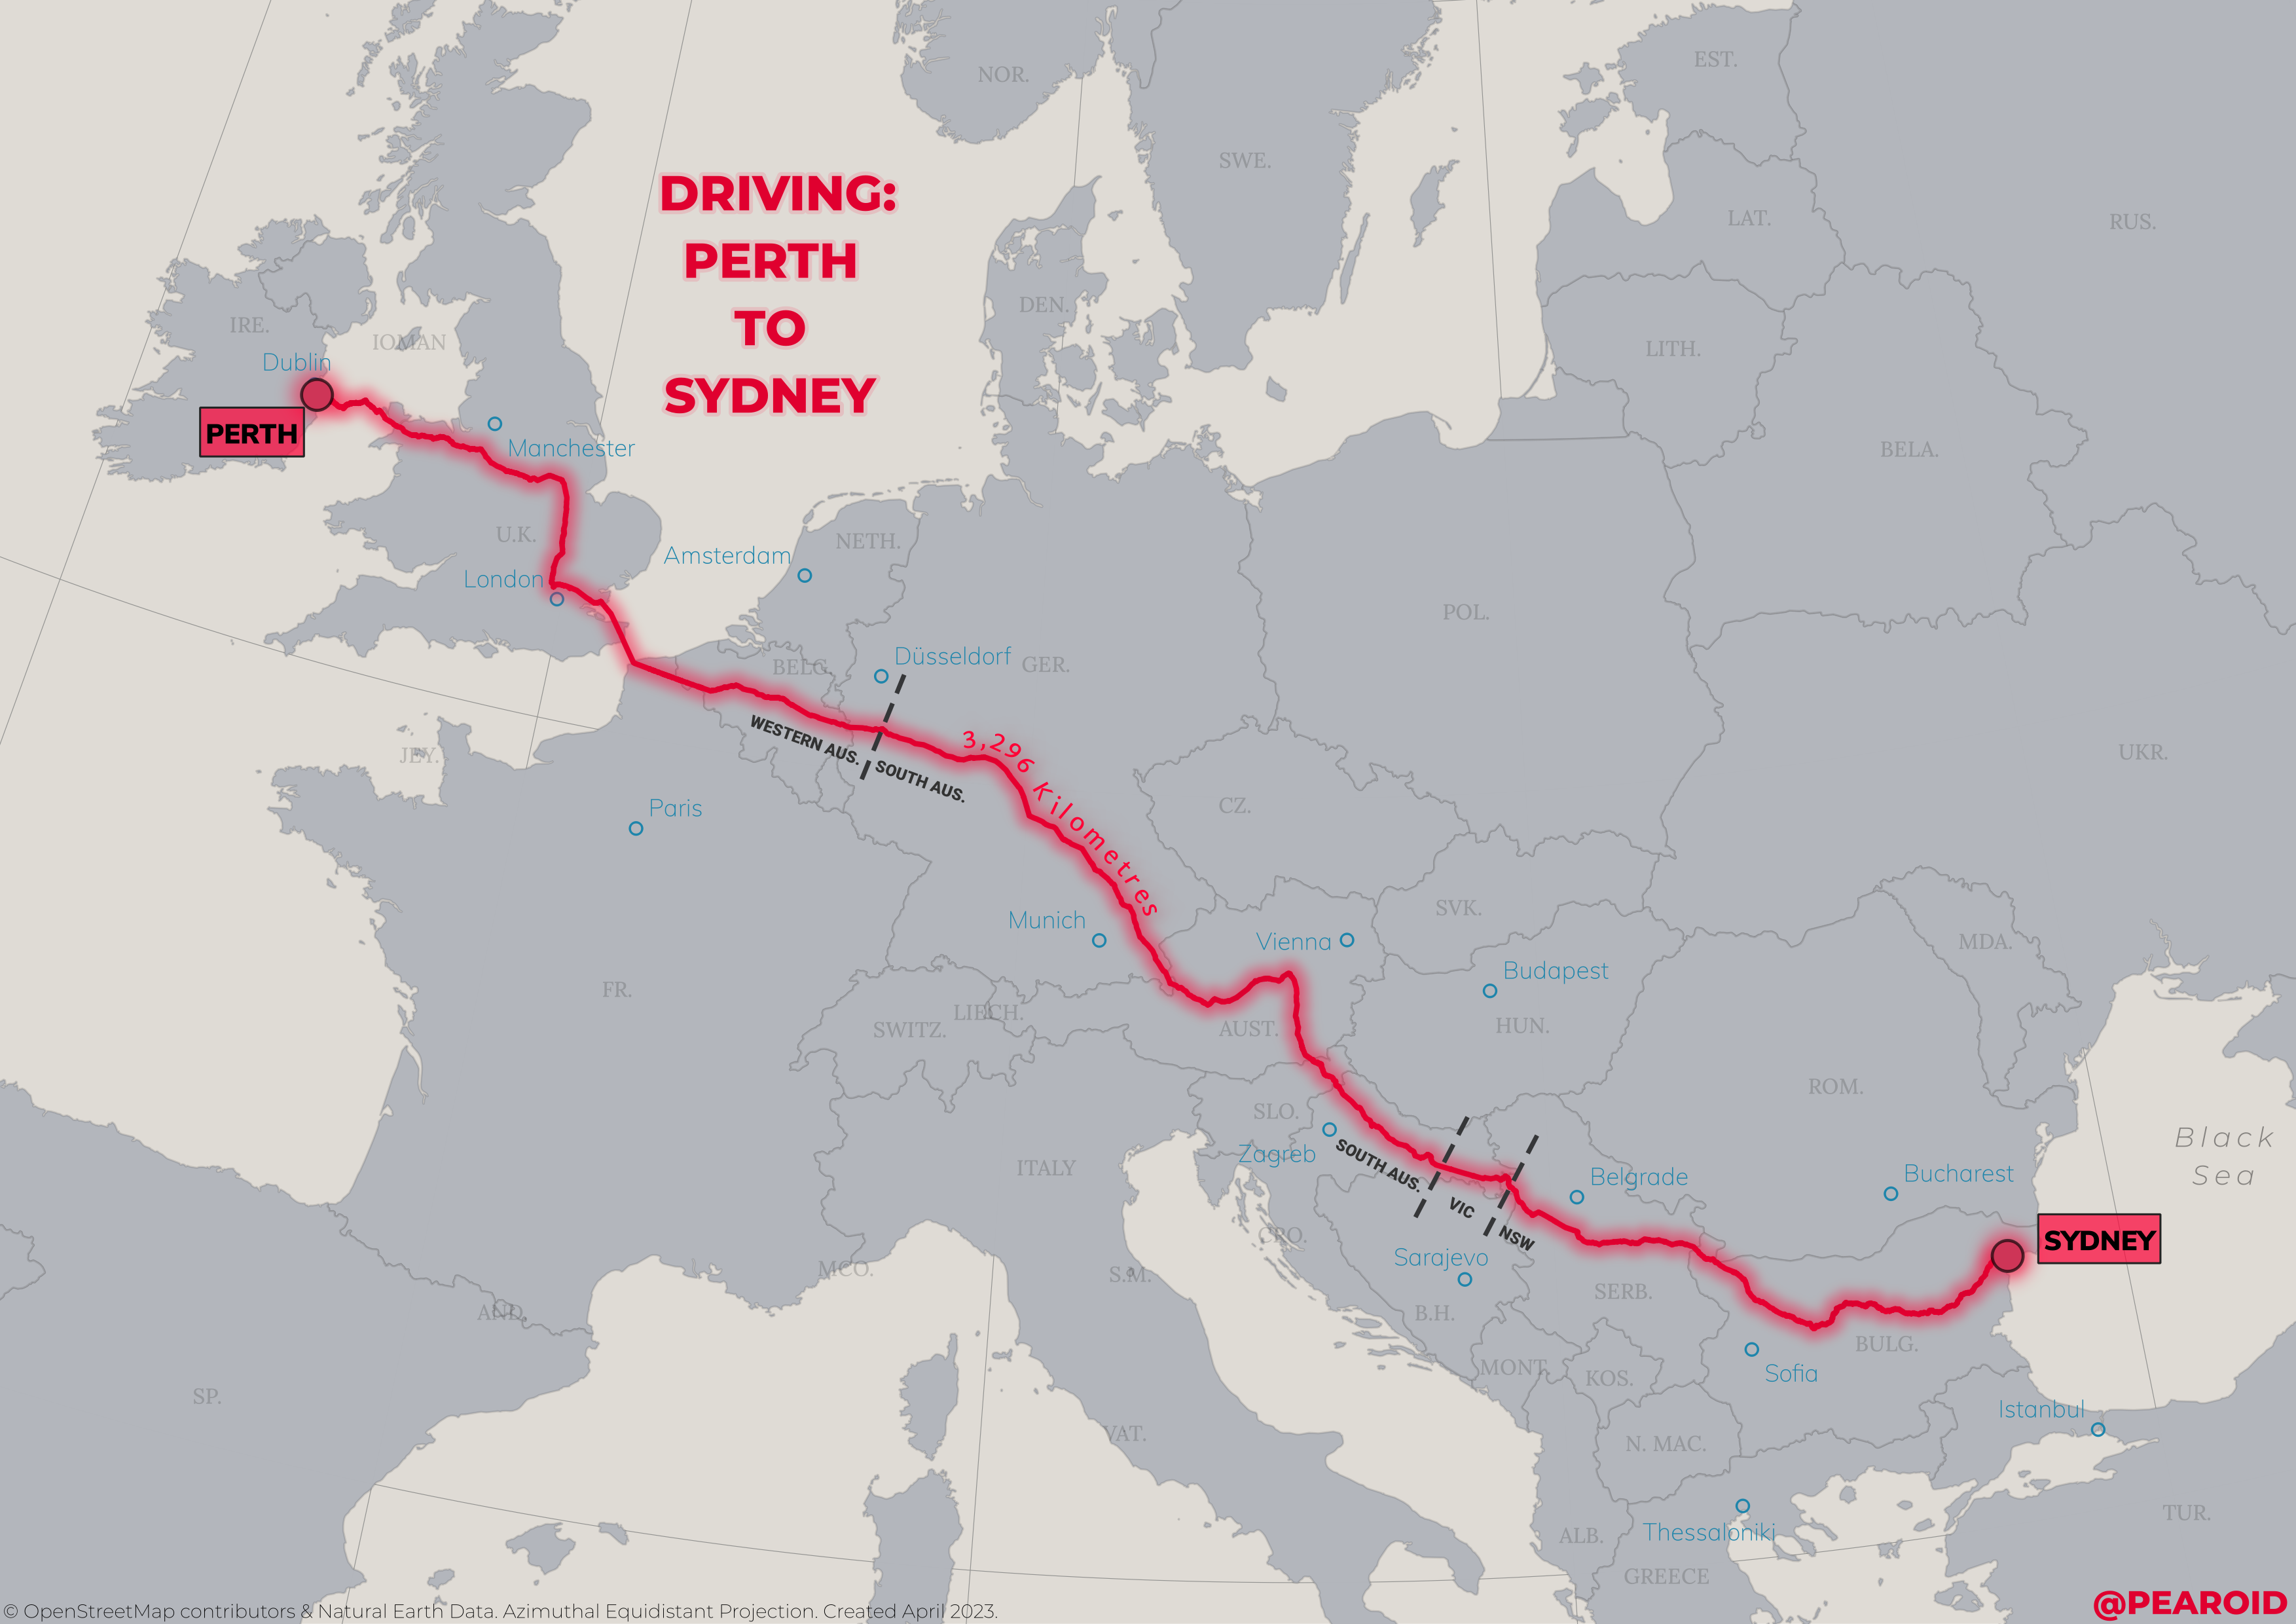 Driving Route from Perth to Sydney overlaid on Europe